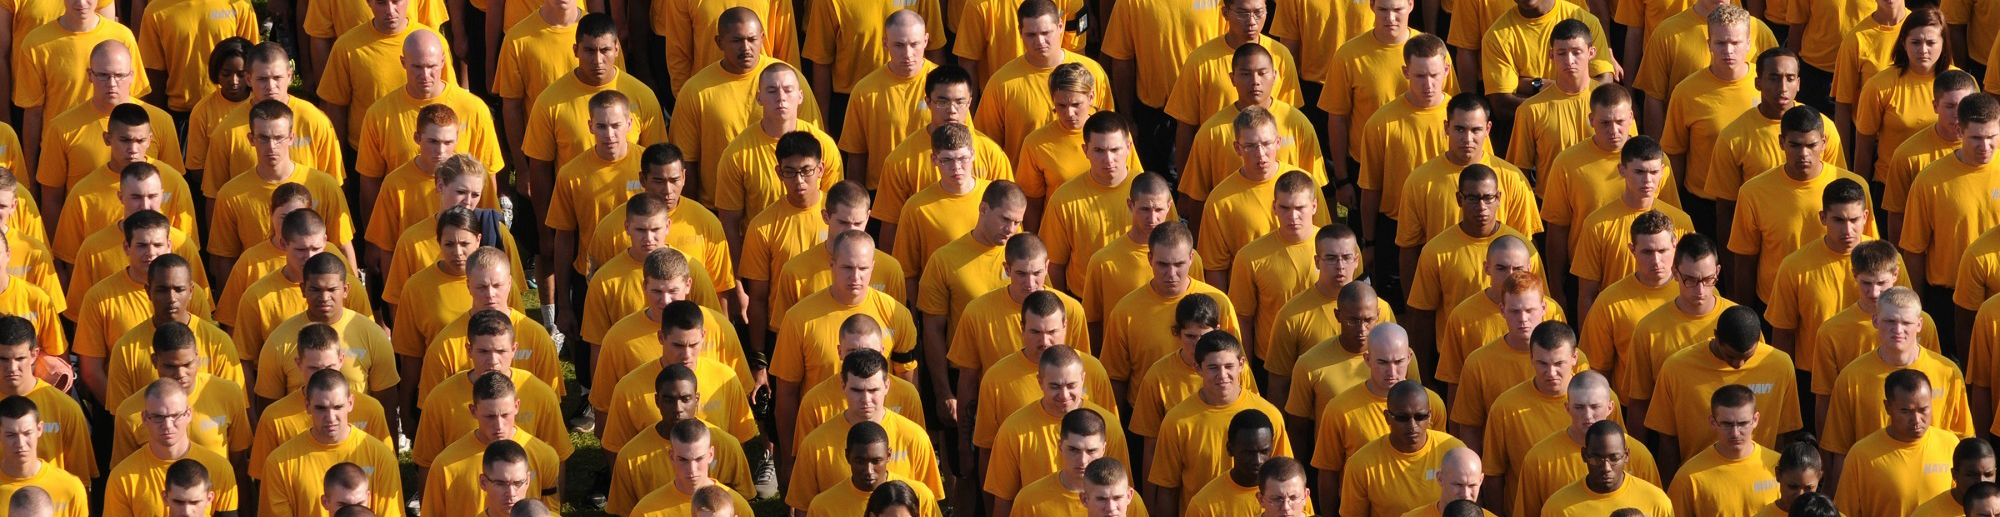 Group of men and women wearing yellow shirts standing shoulder to sholder in tight rows.